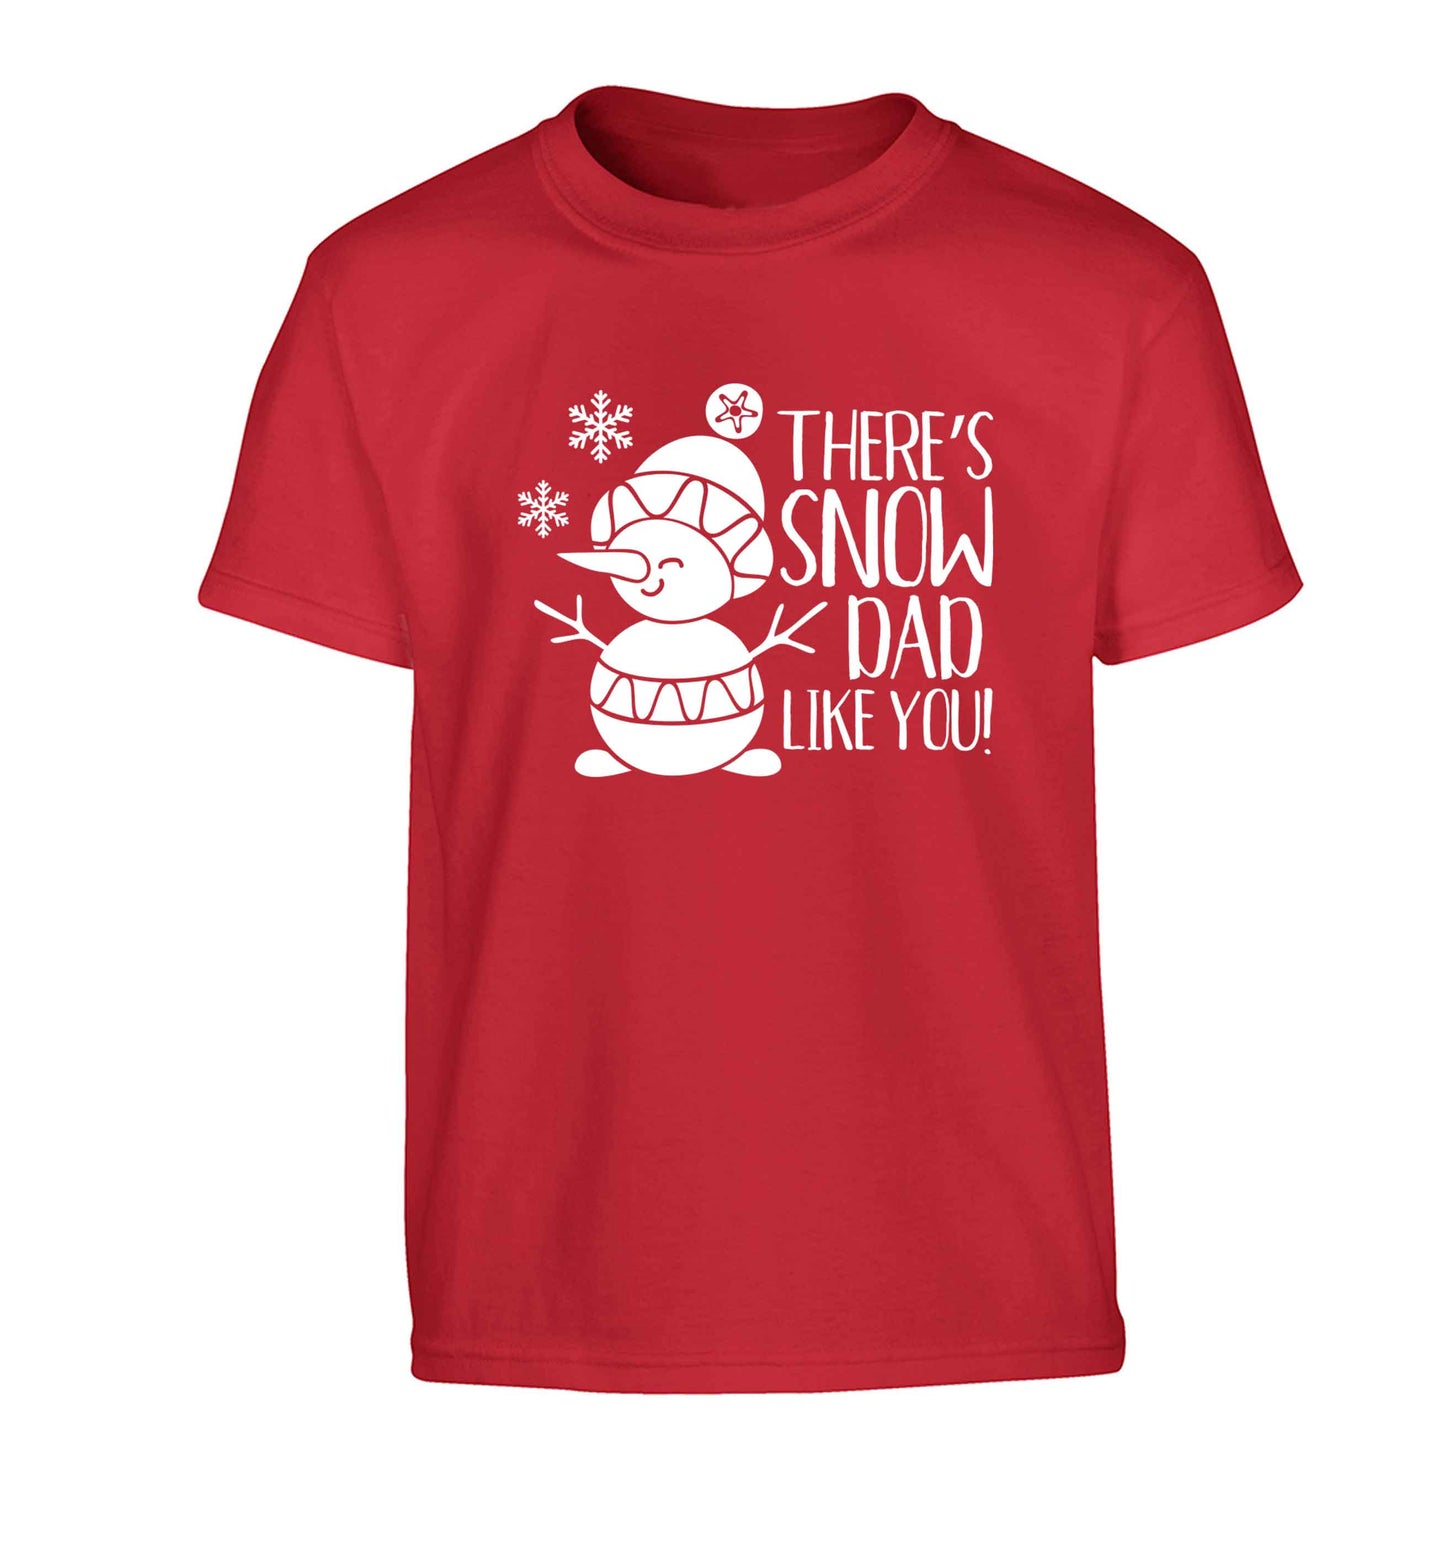 There's snow dad like you Children's red Tshirt 12-13 Years